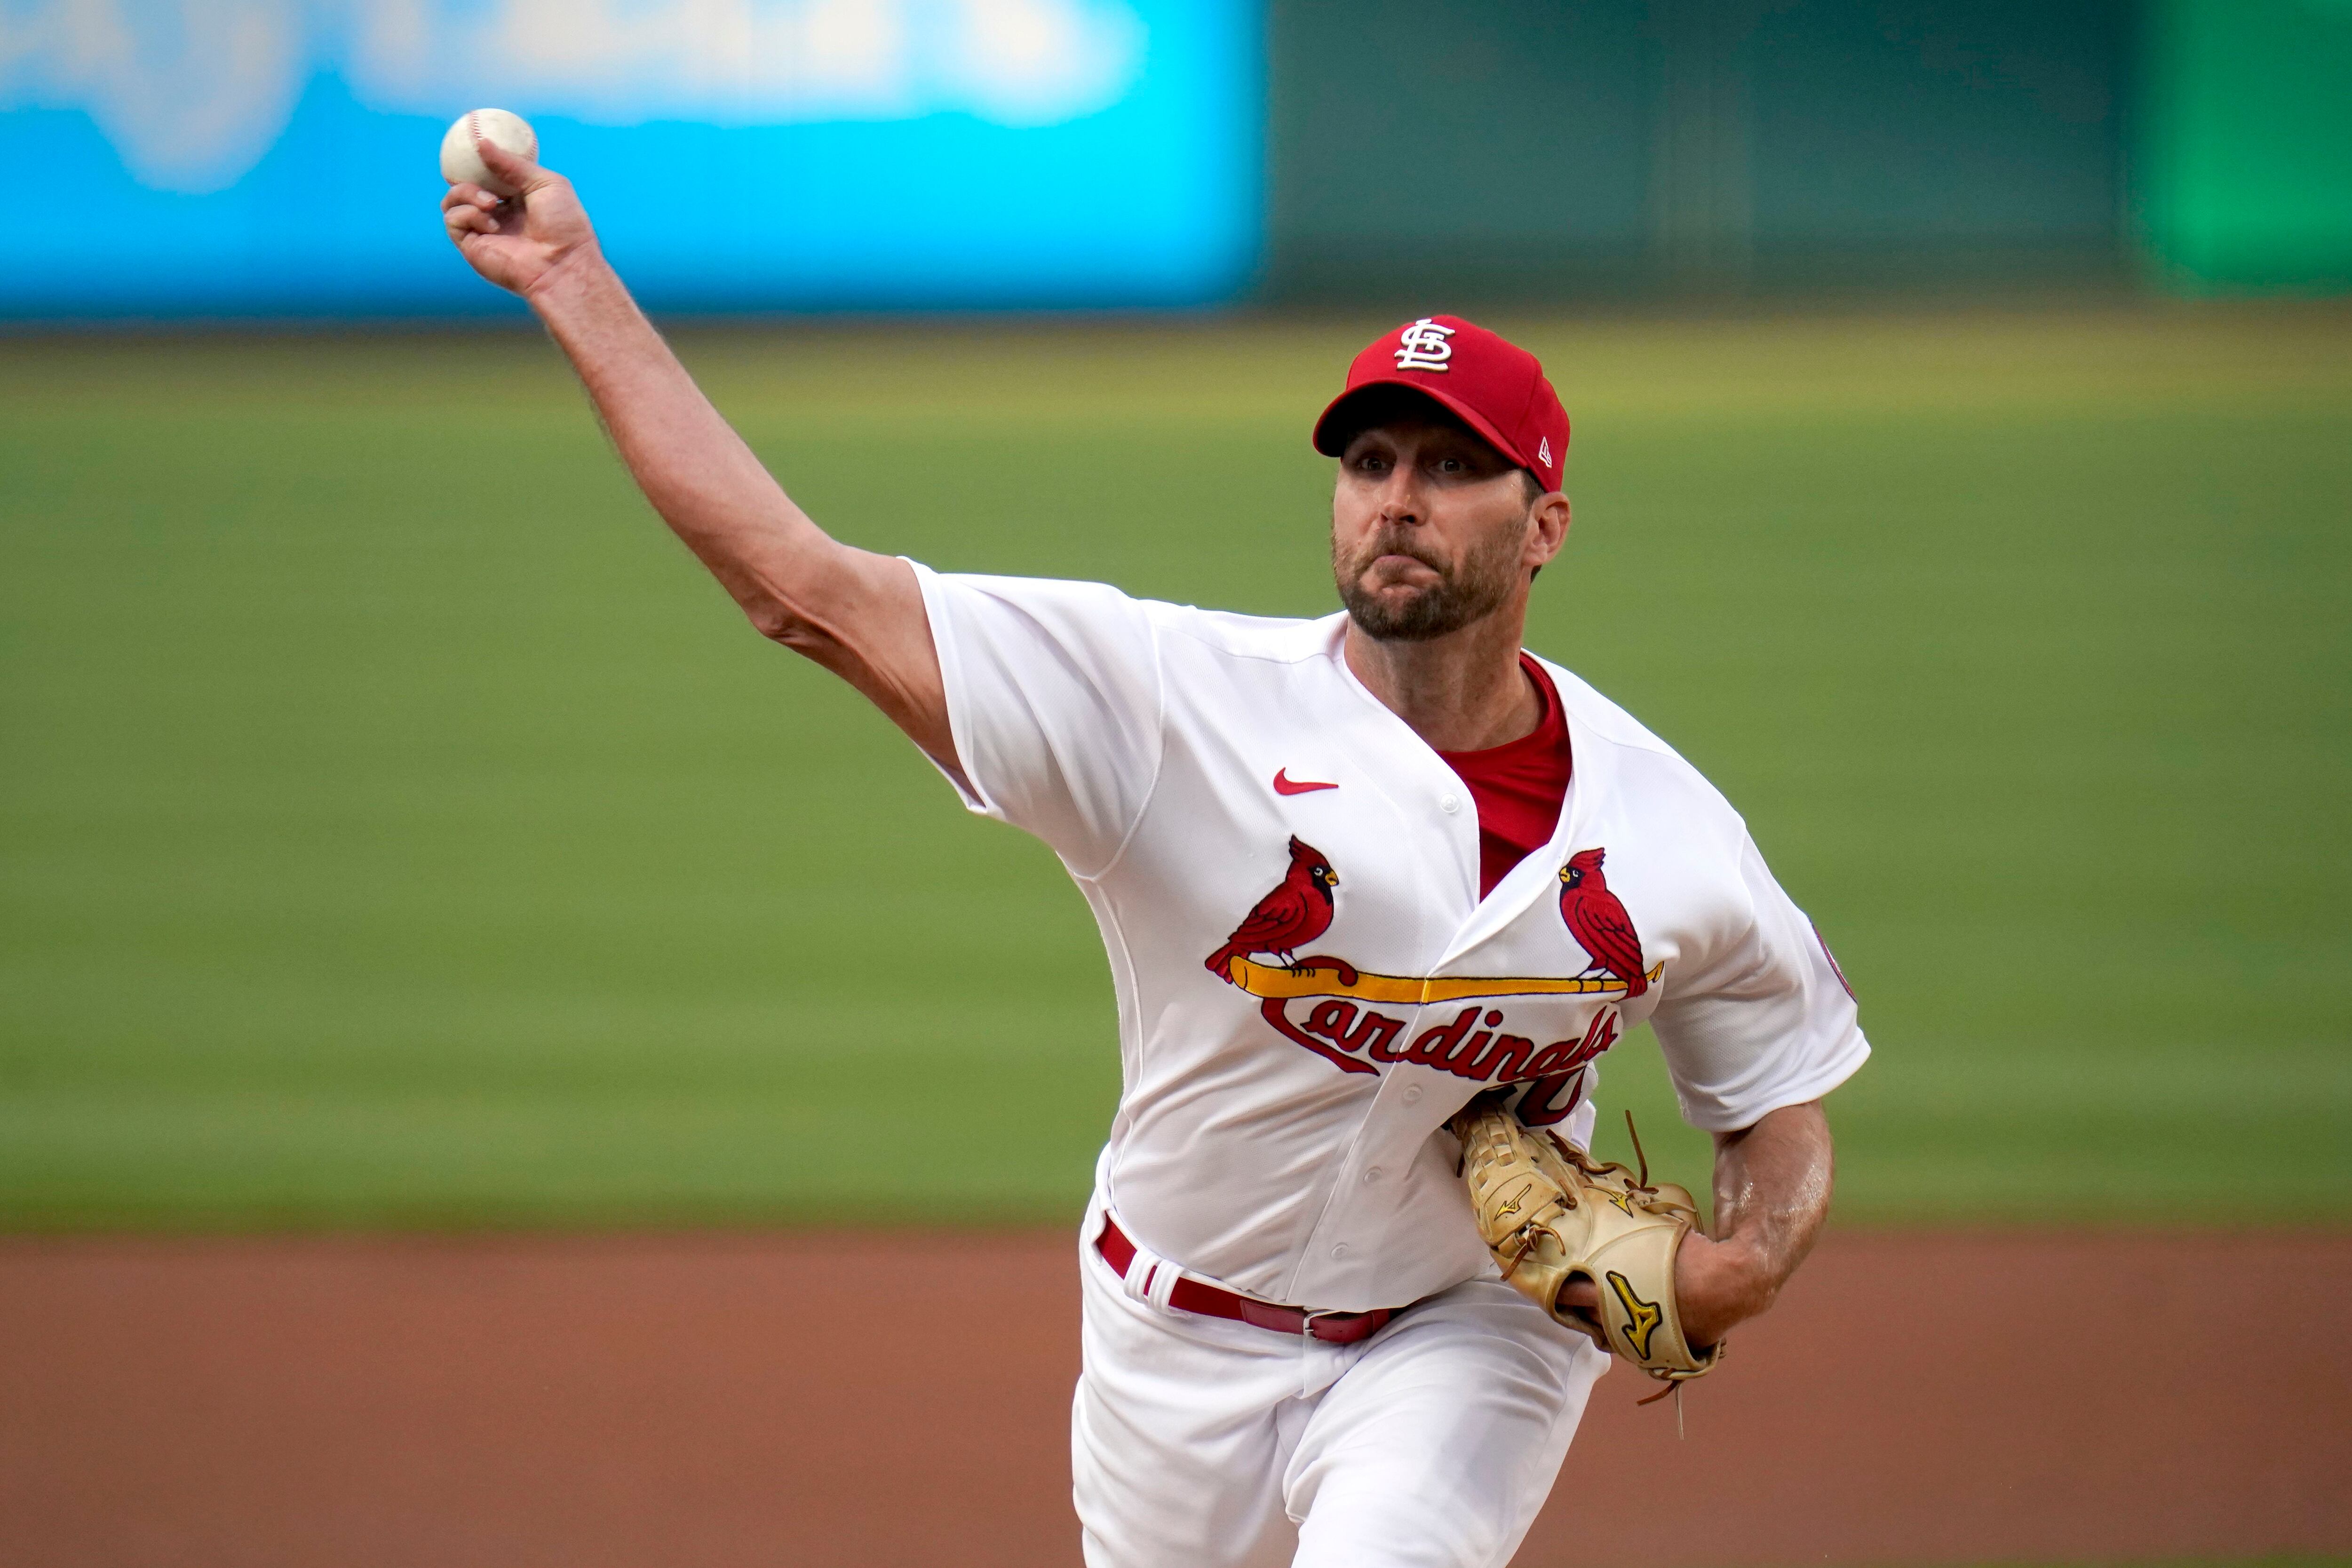 Molina, Wainwright combine for historic day in Cardinals win